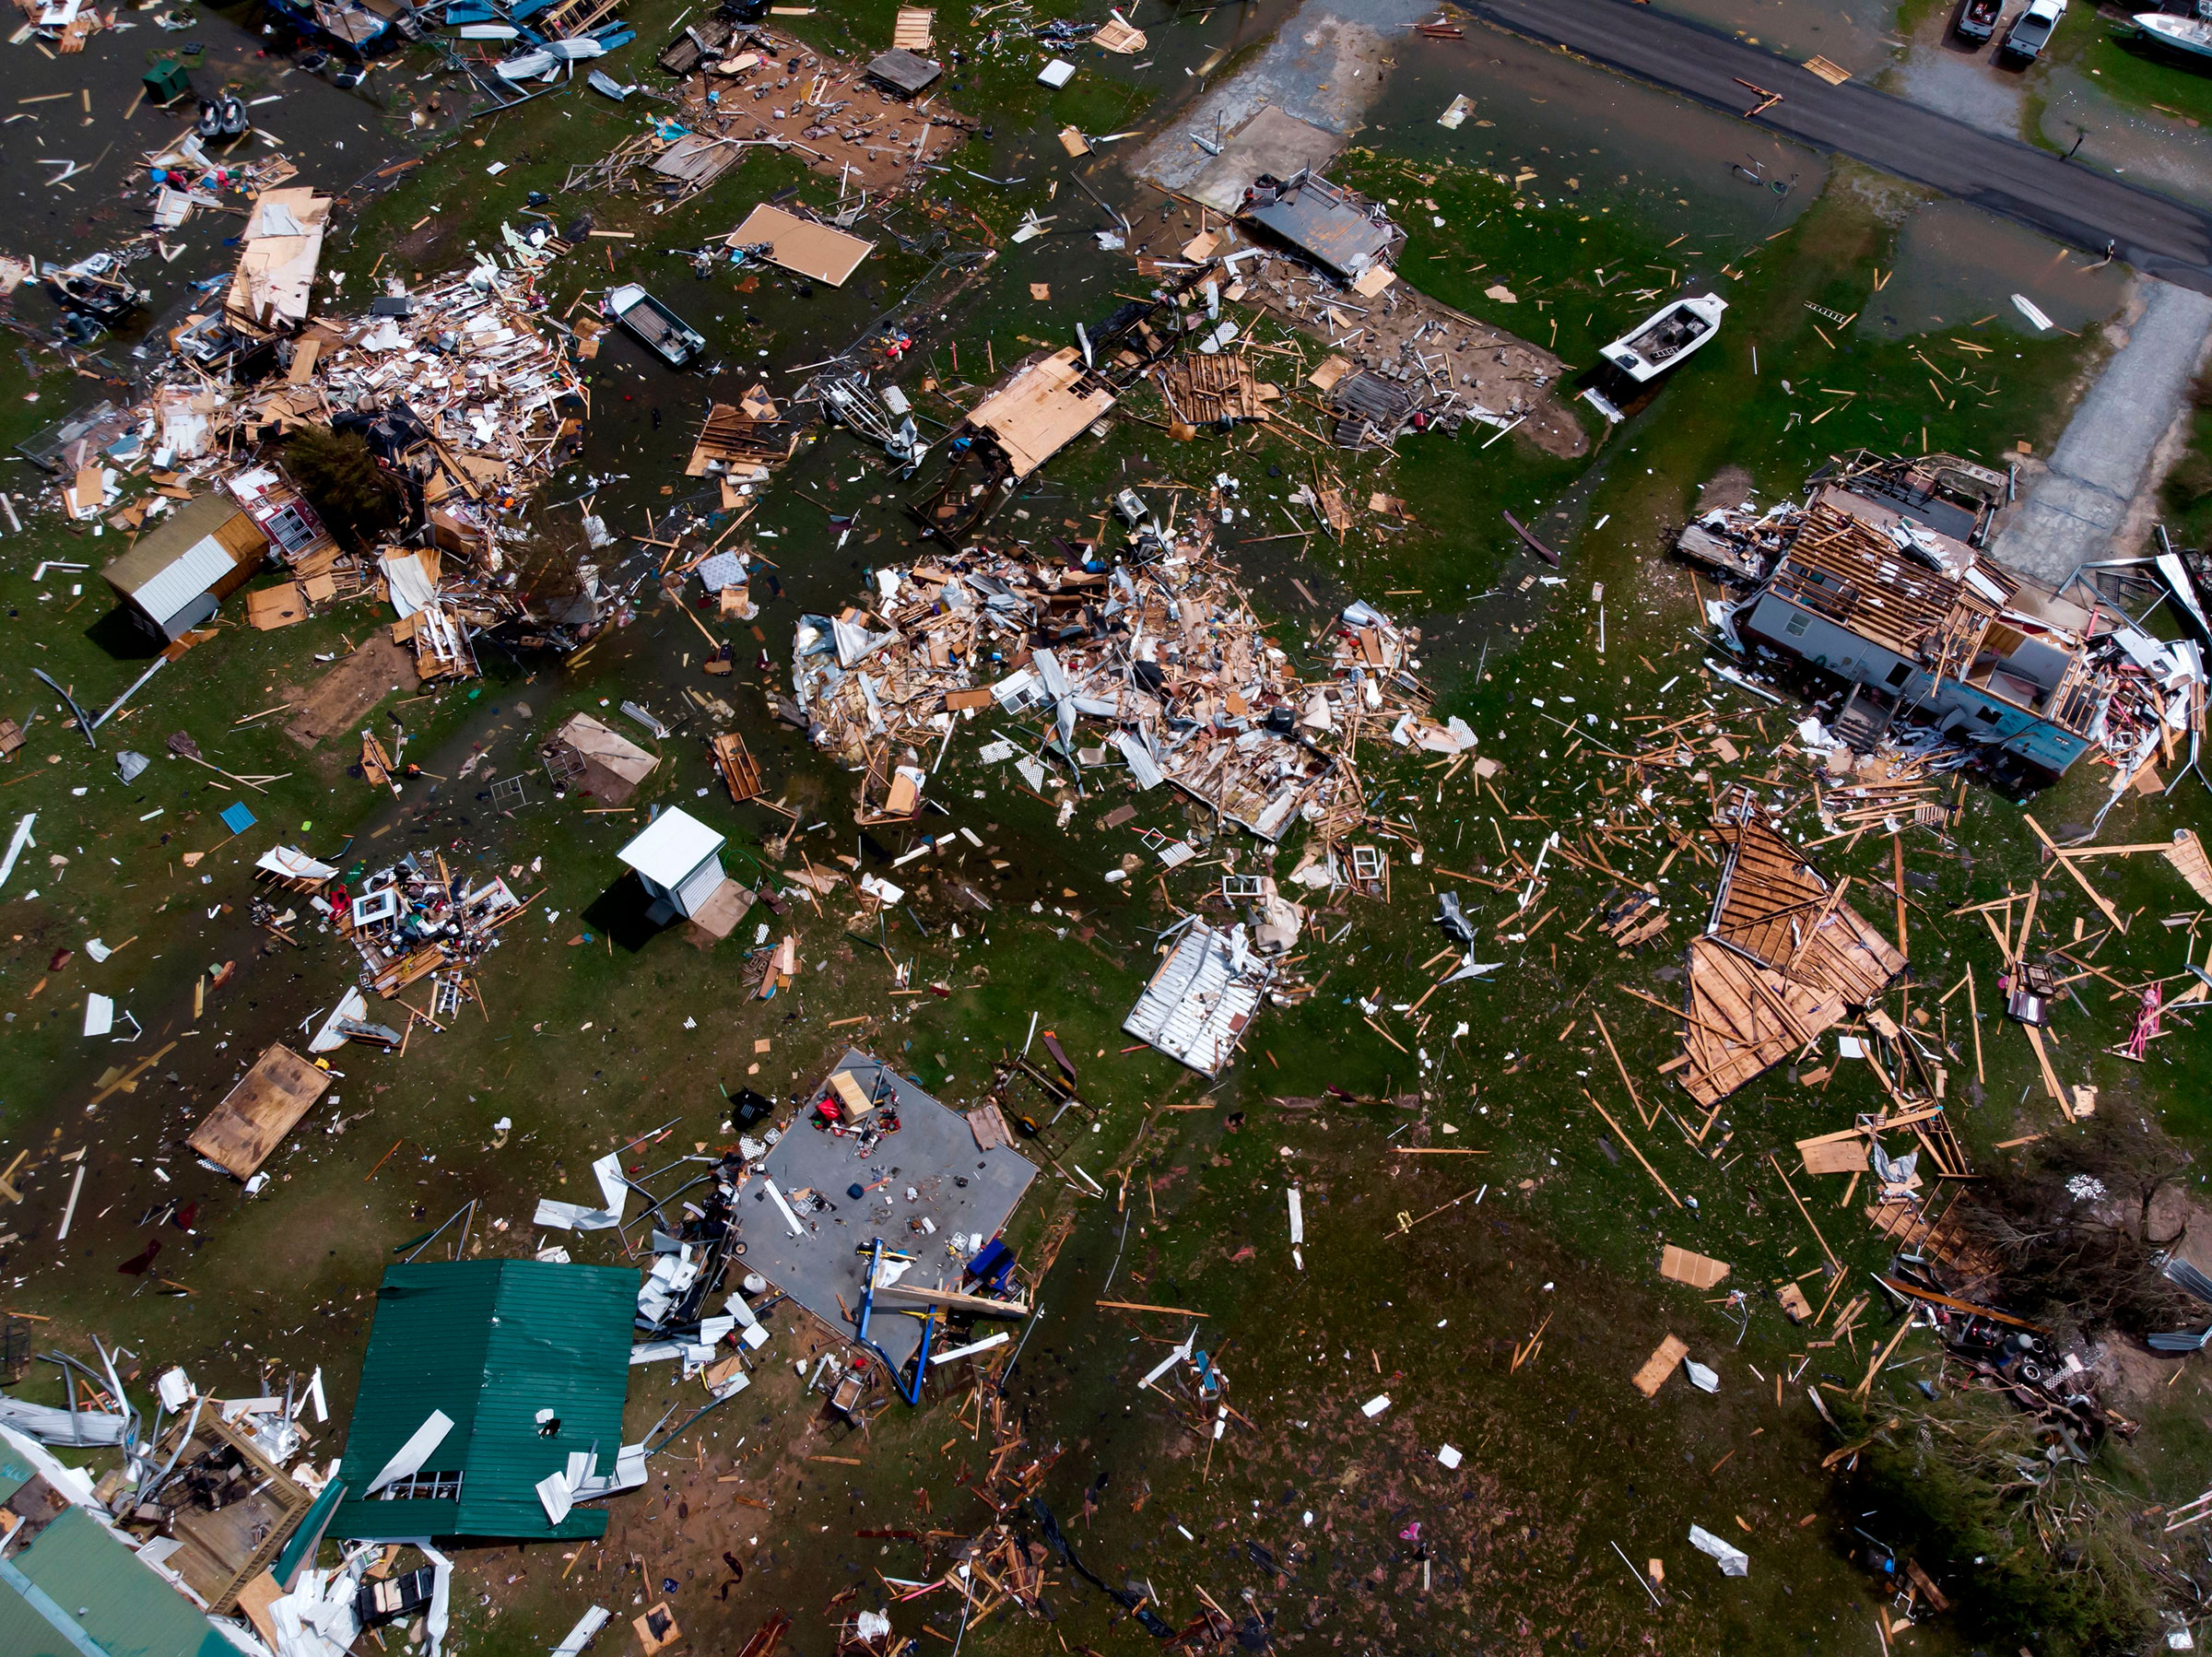 Damage to a neighborhood by Hurricane Laura outside of Lake Charles, La., on Aug. 27, 2020. (AFP/Getty Images)